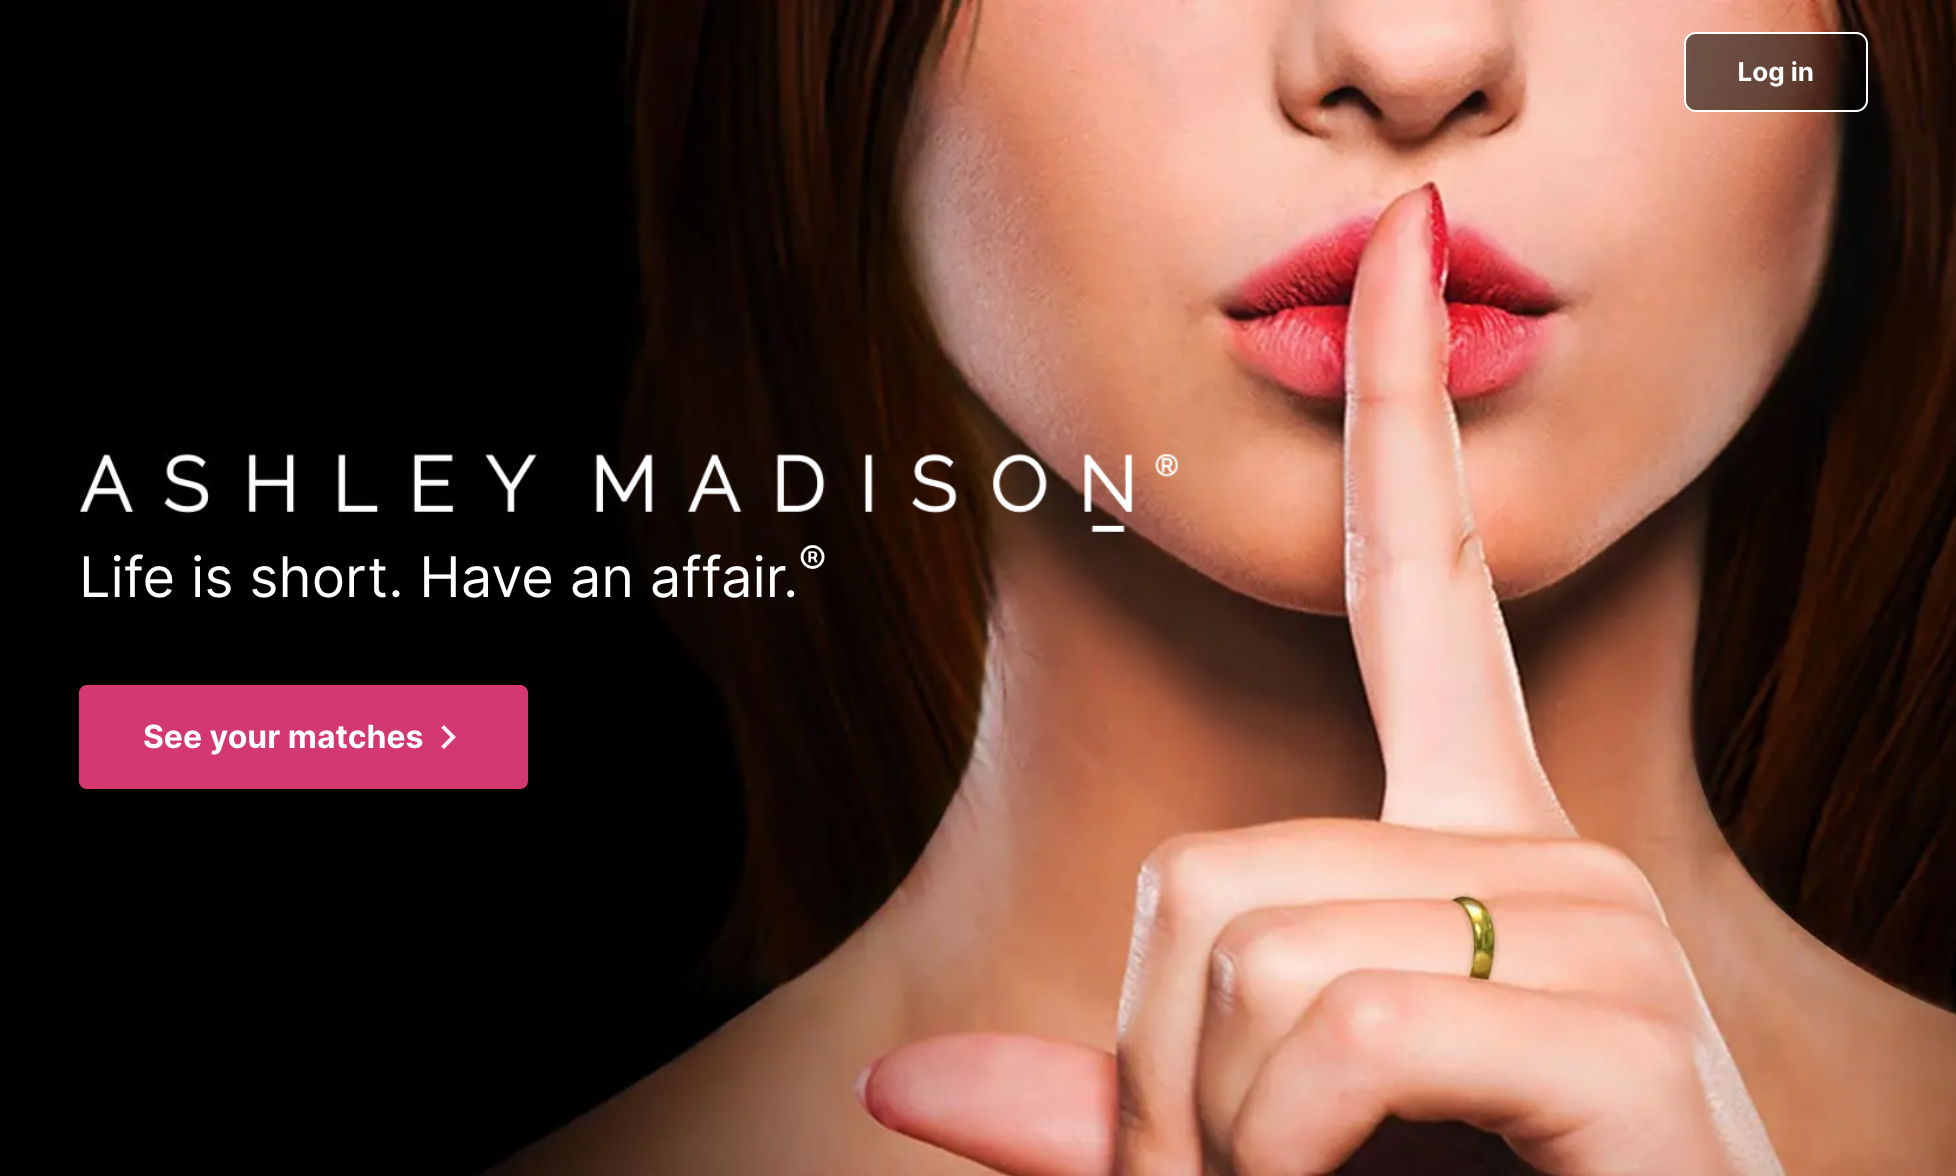 In 2024, the website of Ashley Madison operates under the slogan  Life is short. Have an affair. The security section is full of obvious and cursory privacy tips like using two-factor authentication. Source: ashleymadison.com